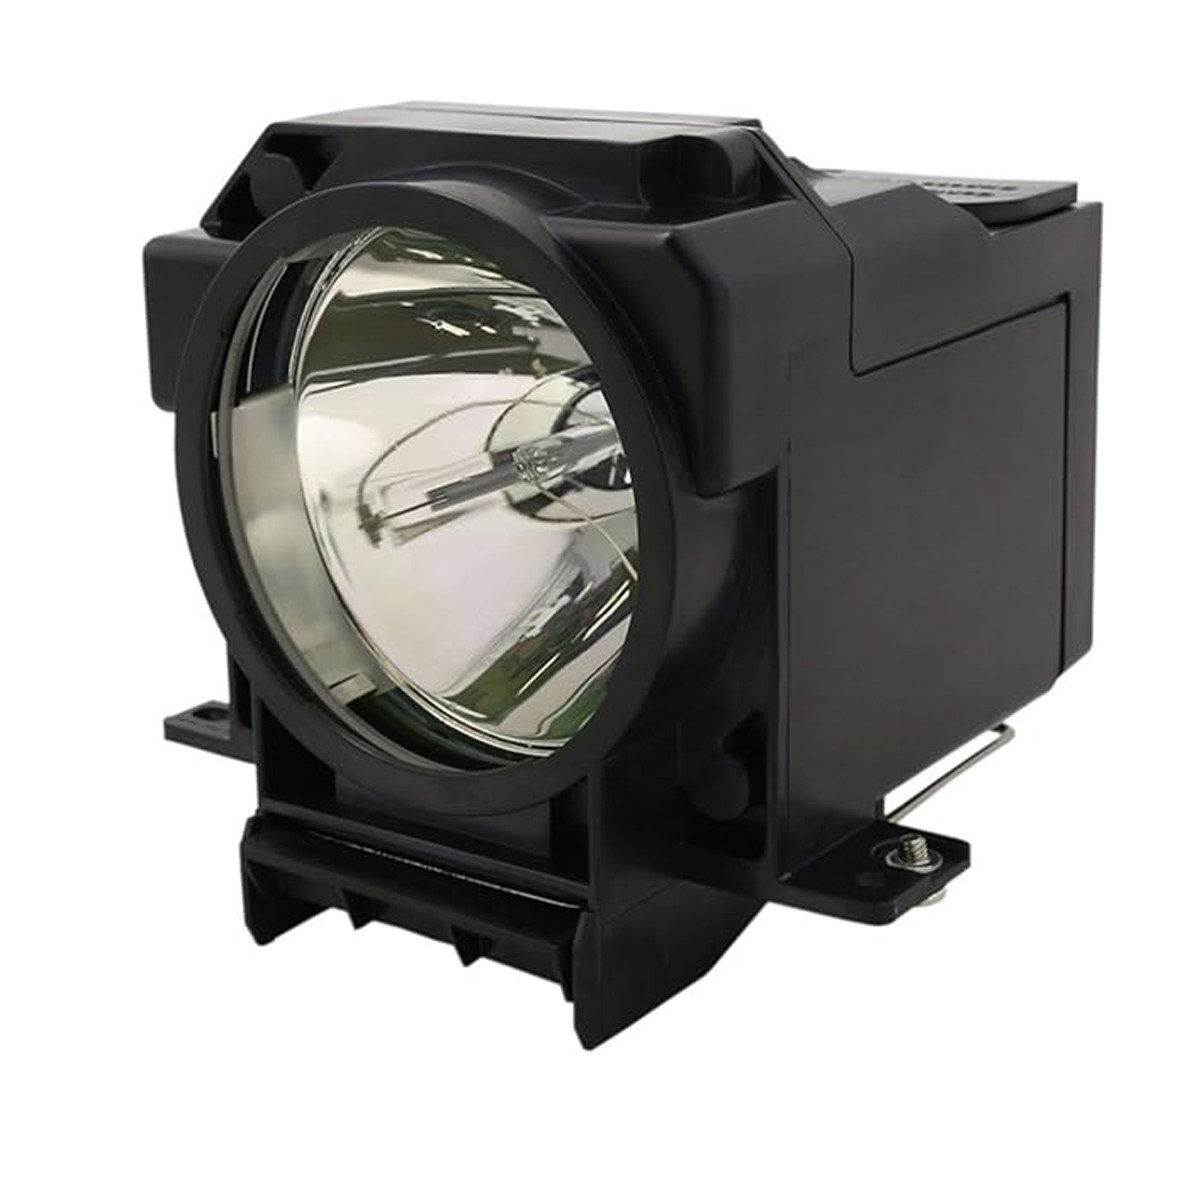 Replacement Projector lamp ELPLP26 For Epson EMP -9300/EMP -9300NL